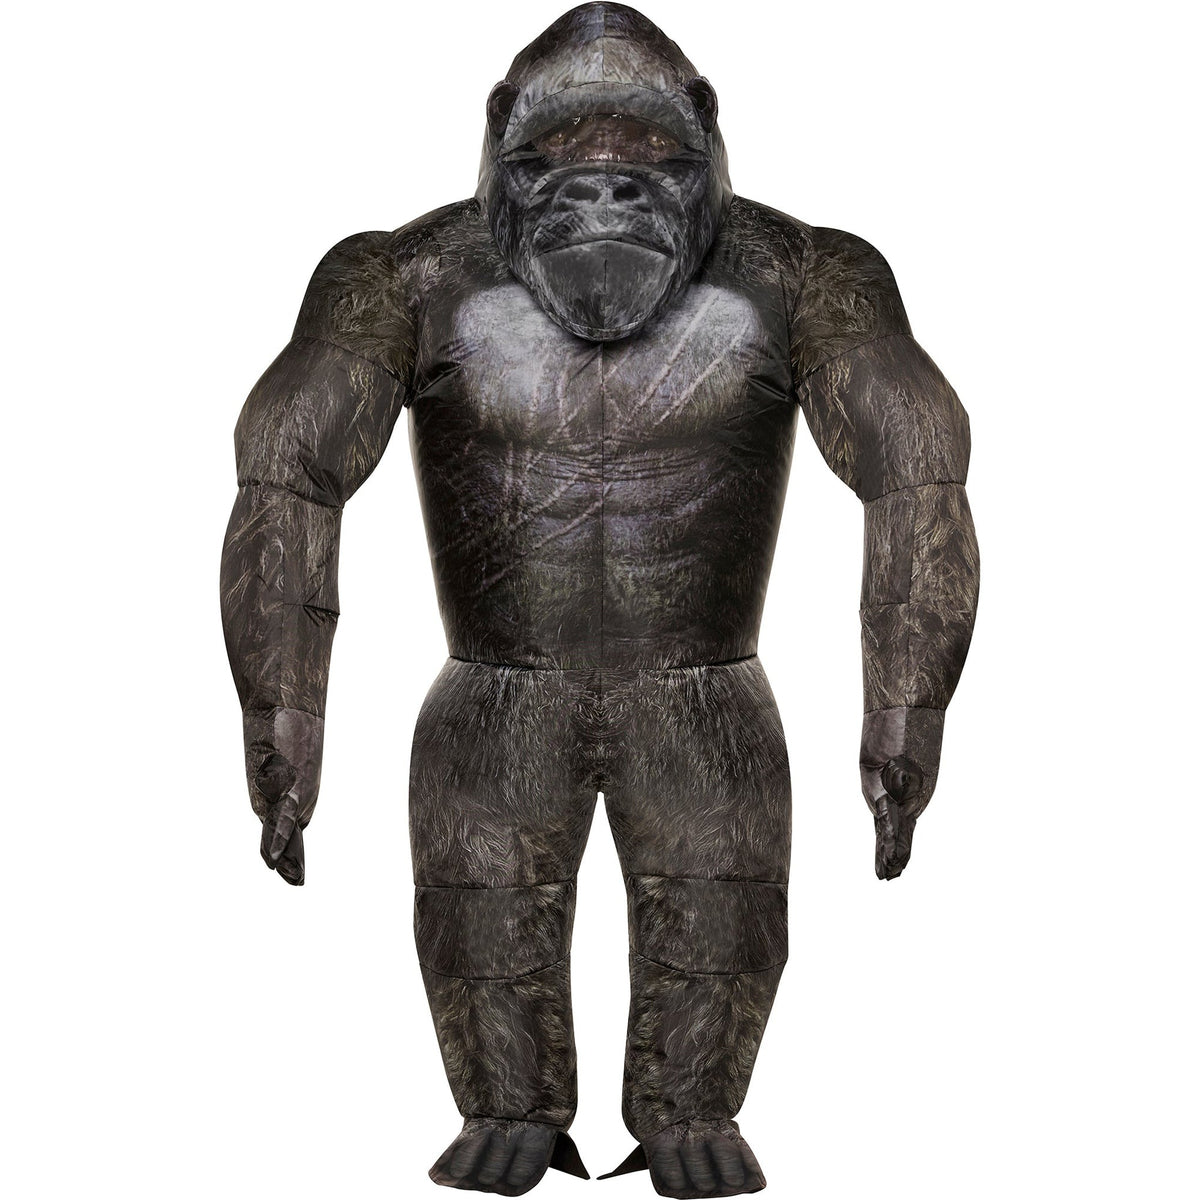 IN SPIRIT DESIGNS Costumes Inflatable Kong Costume for Adults, Godzilla x Kong: The New Empire